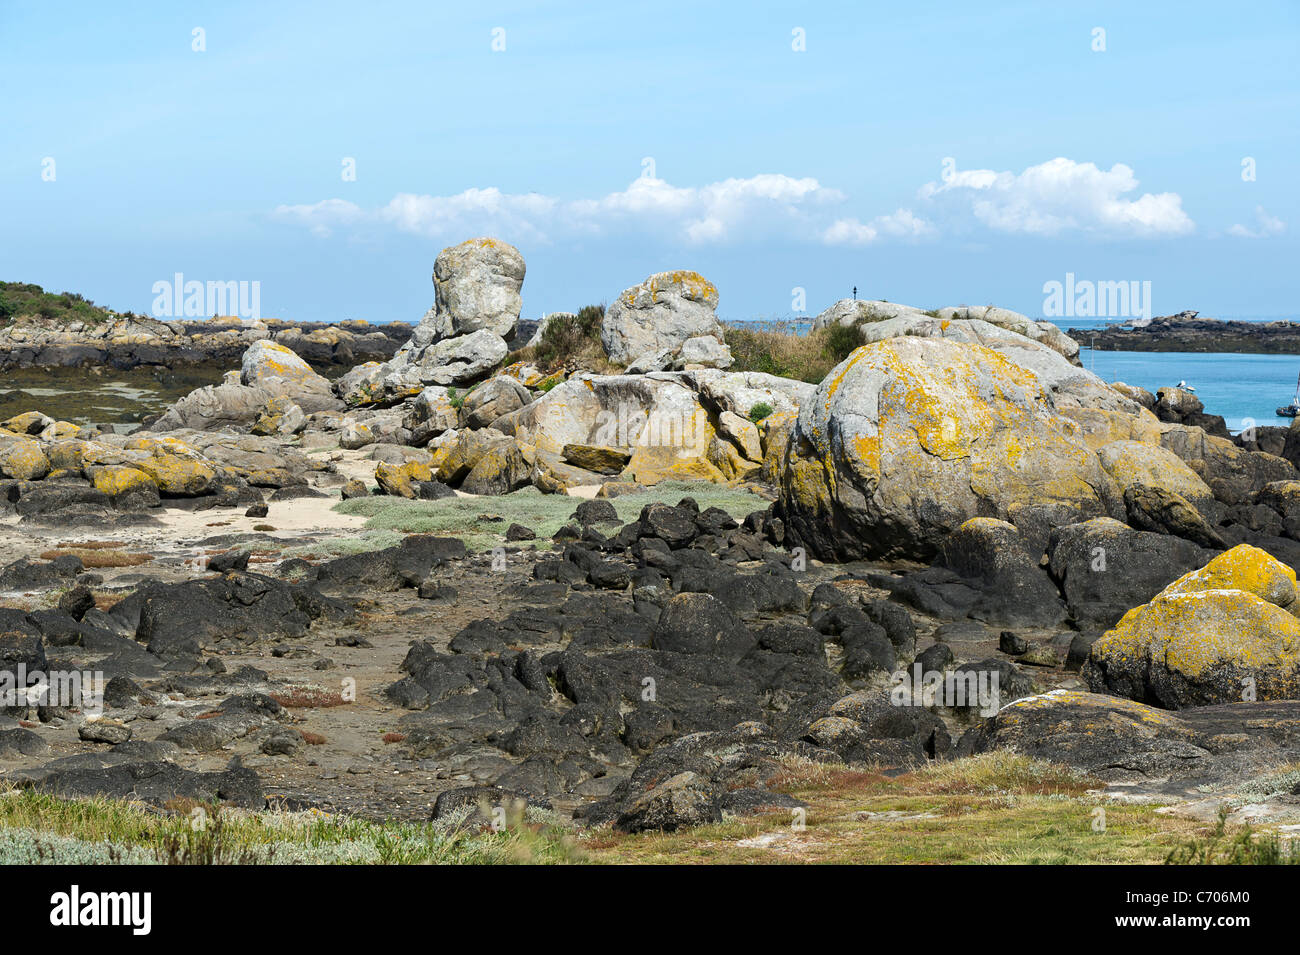 Huge rocks exposed at low tide on the Chausey islands off the coast of Normandy, France. Stock Photo